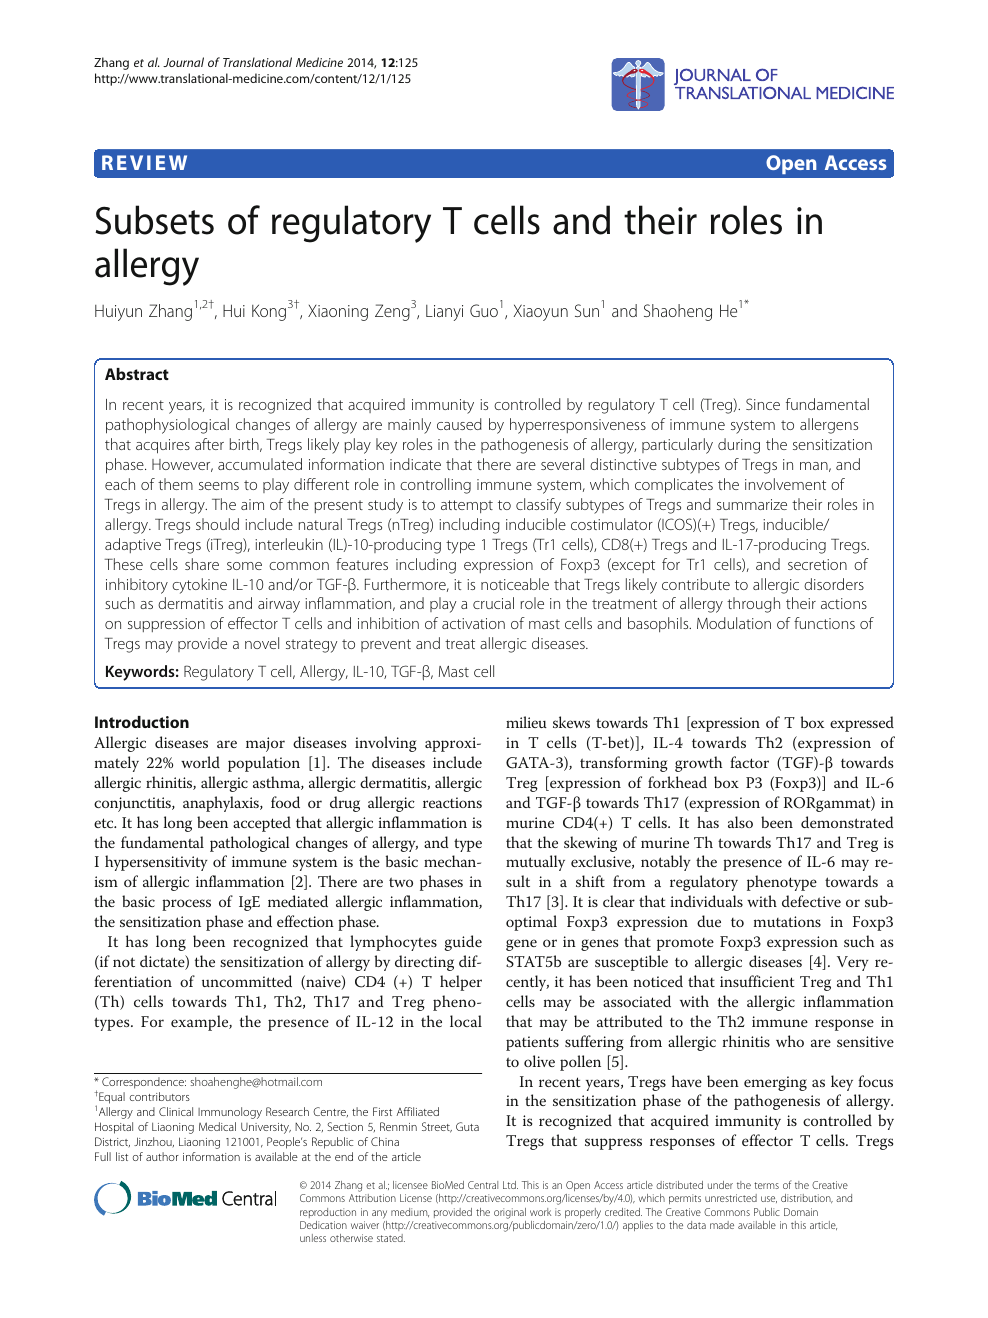 Subsets of regulatory T cells and their roles in allergy topic of research paper in Biological sciences. Download scholarly article and read for free on CyberLeninka open science hub.